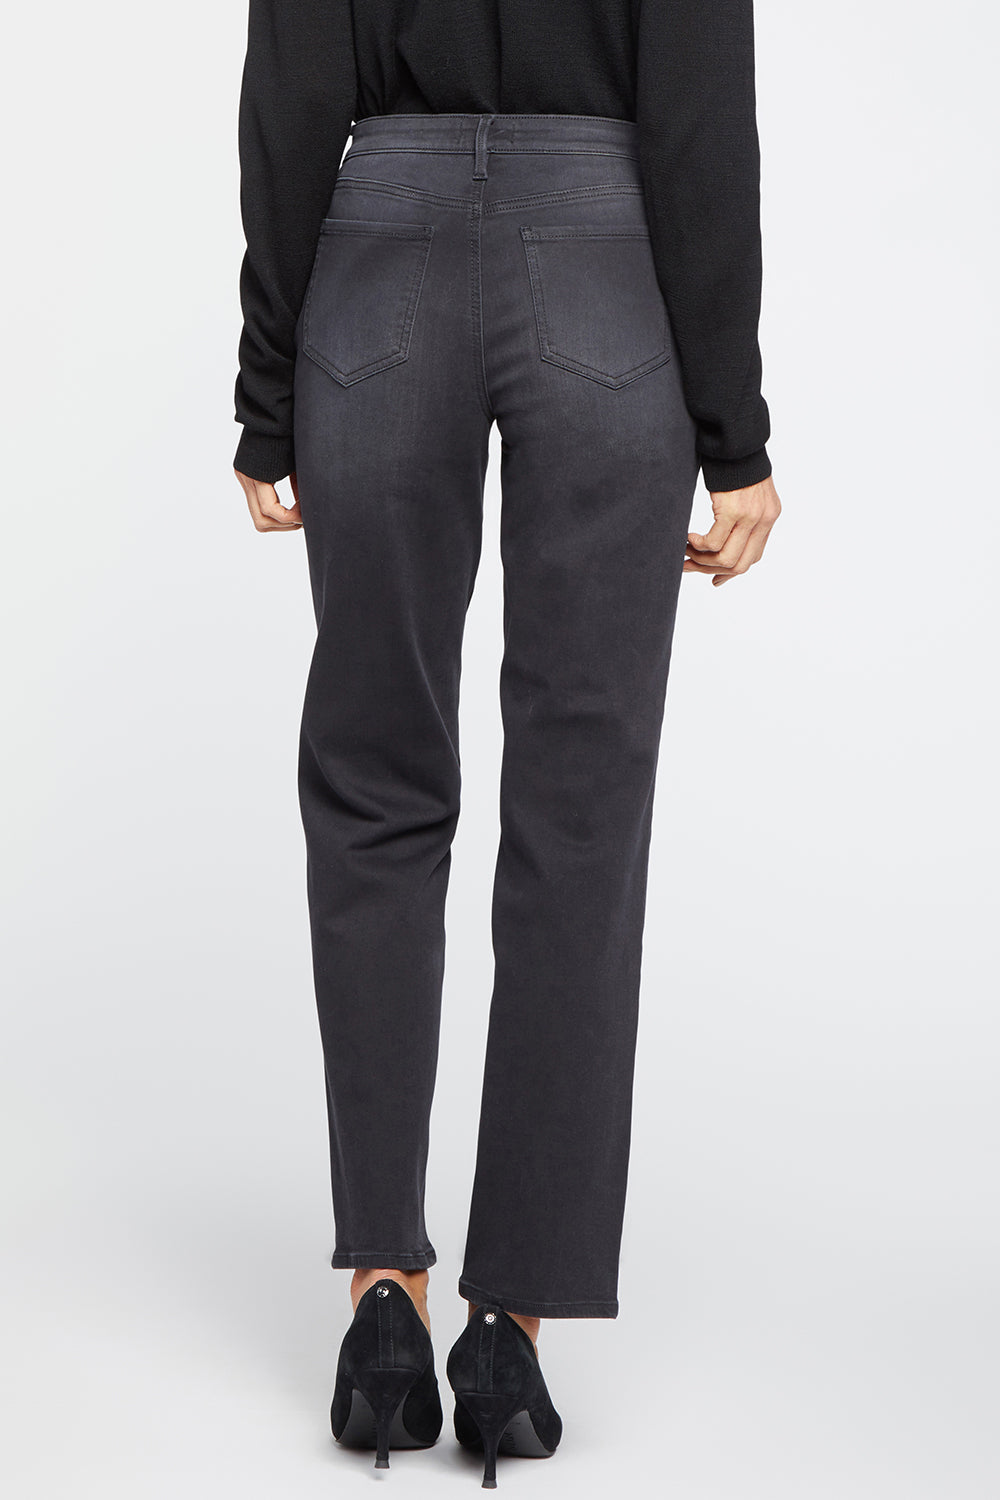 Relaxed Flared Jeans In Stretch Pearl NYDJ | Black - Sateen Black